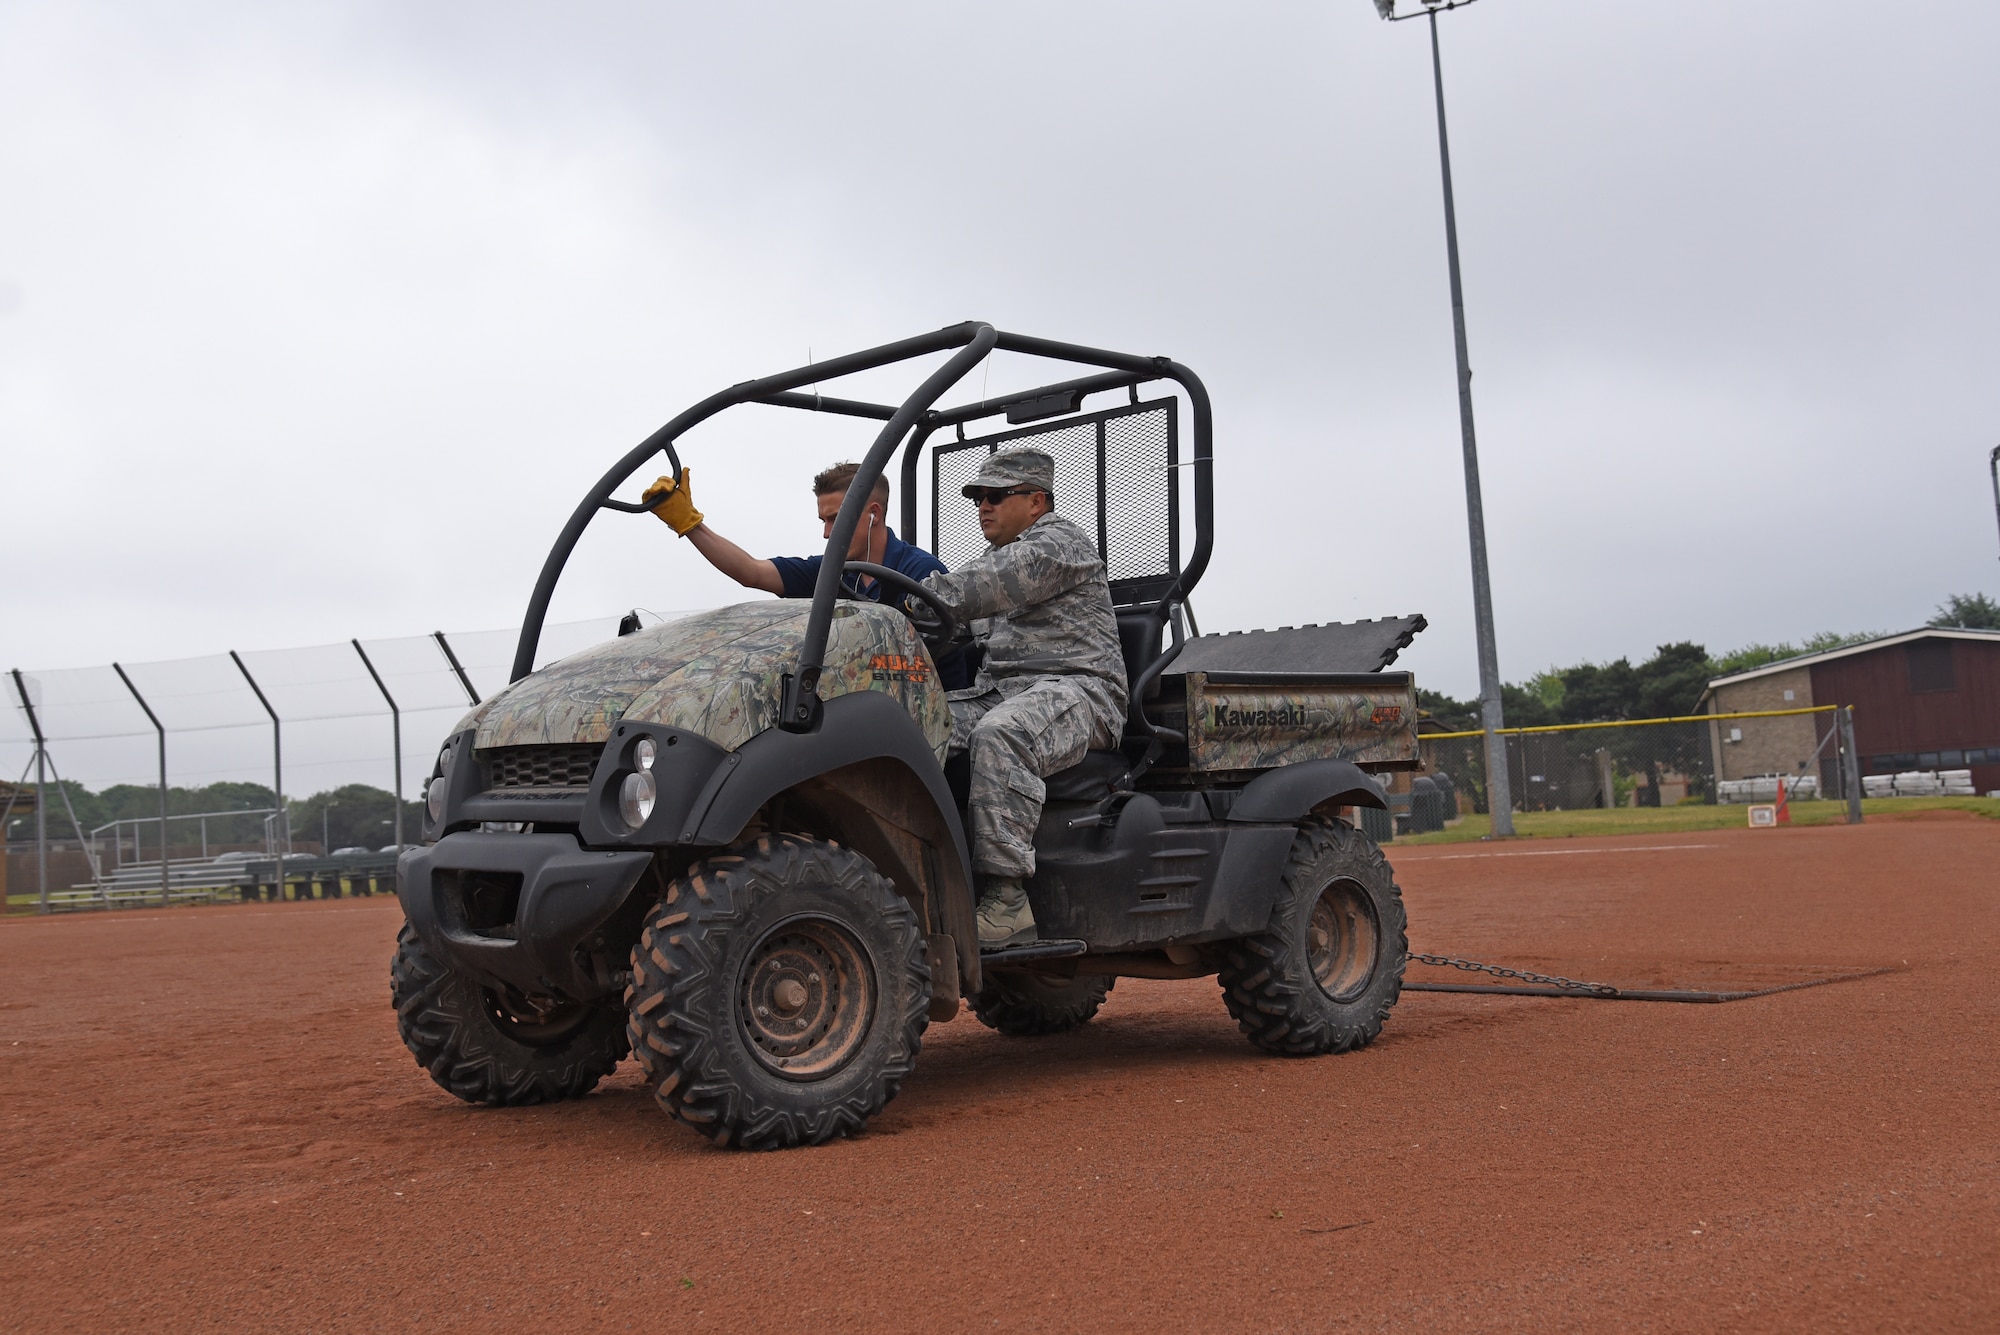 An Airman from the 161st Force Support Squadron, accompannied by his counterpart from the 48th Force Support Squadron, uses a utility vehicle to groom a softball field before an upcoming tournament at Royal Air Force Lakenheath, England May 30, 2018. The Airman worked with multiple section of the 48th FSS to get a variety of valuable training and experience to help improve knowledge and mission readiness. (U.S. Air National Guard photo by Staff Sgt. Dillon Davis)